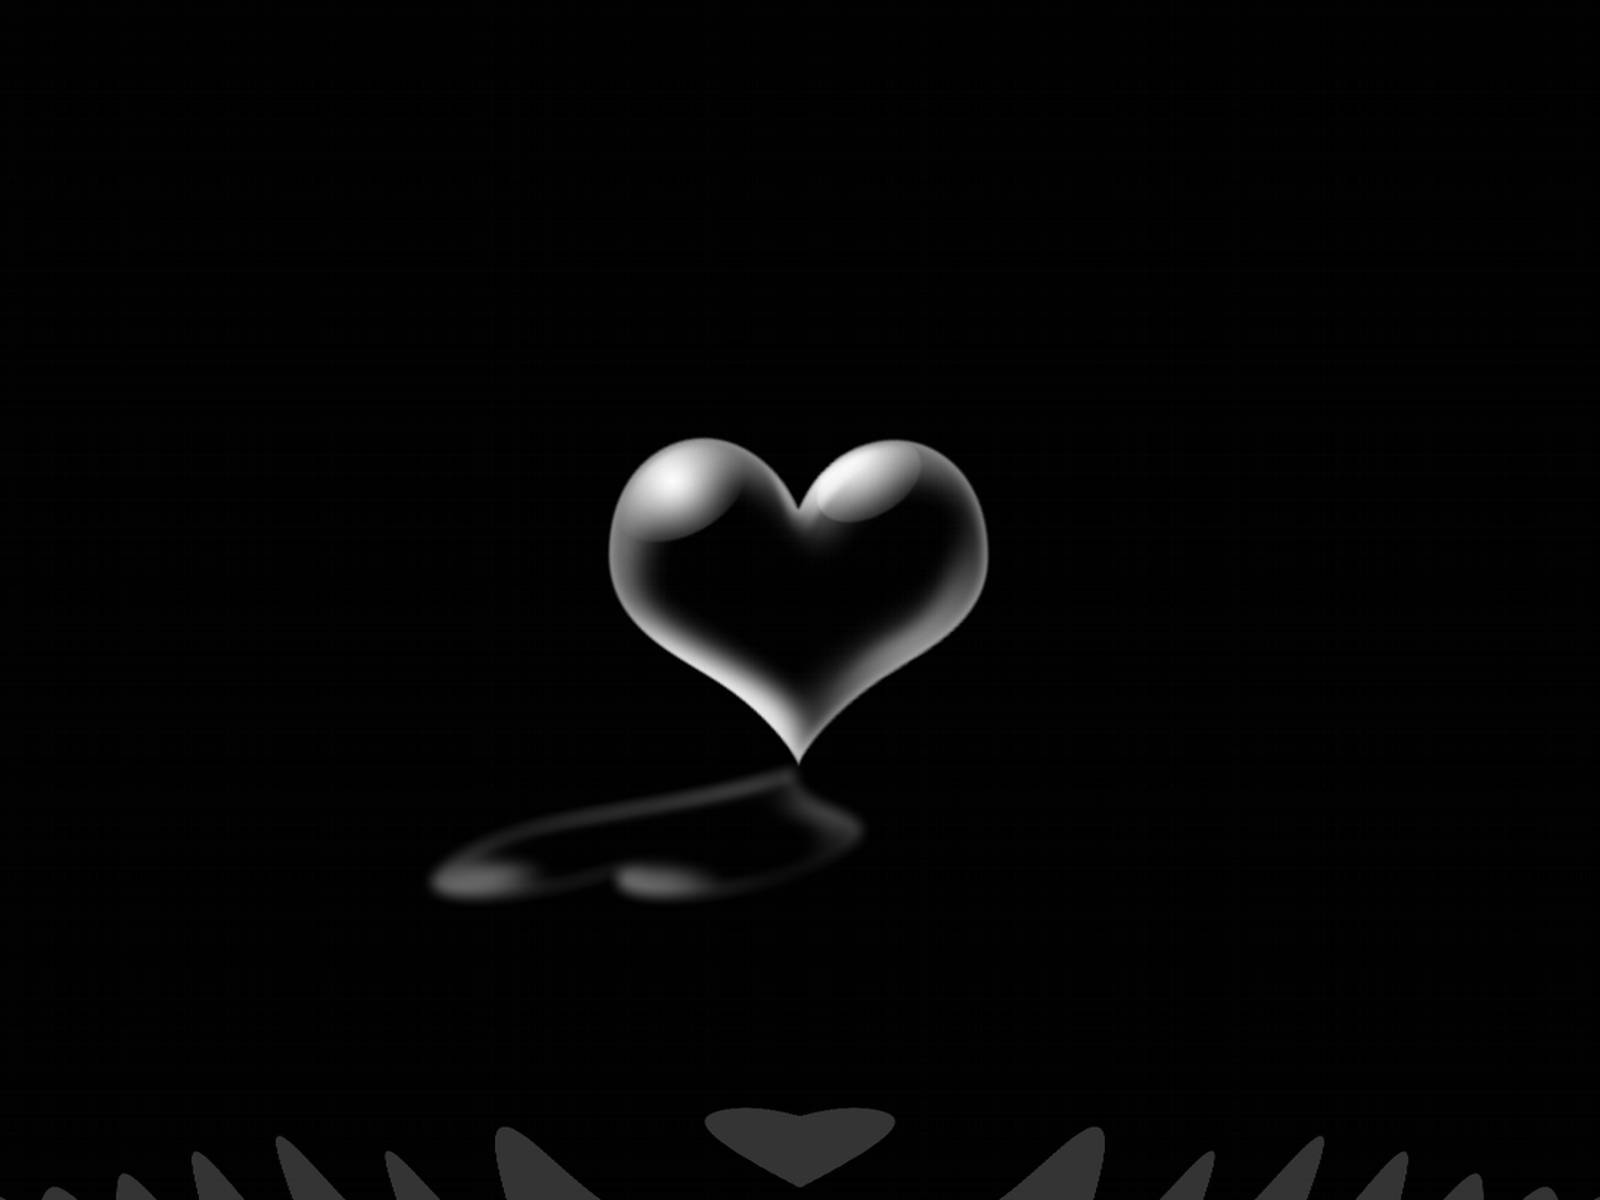 Frosted Graphic Heart Black Lover Background Wallpaper